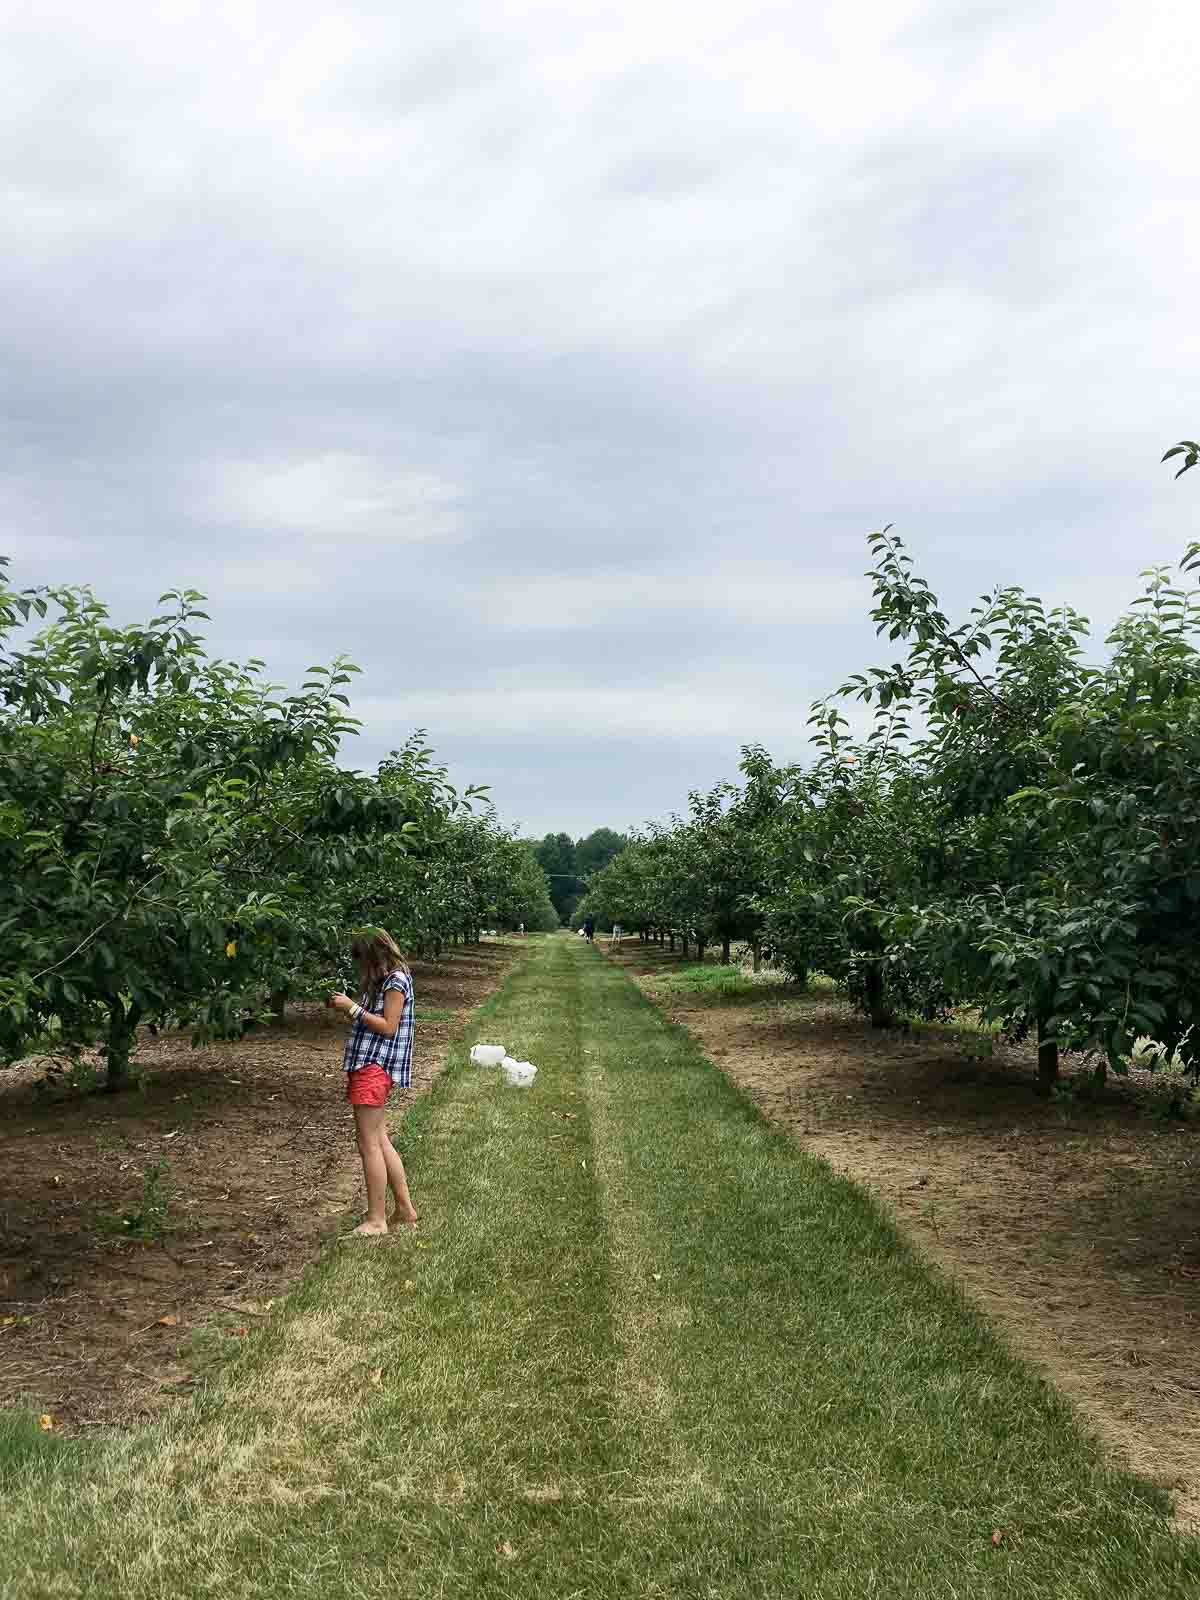 child picking sour cherries in an orchard